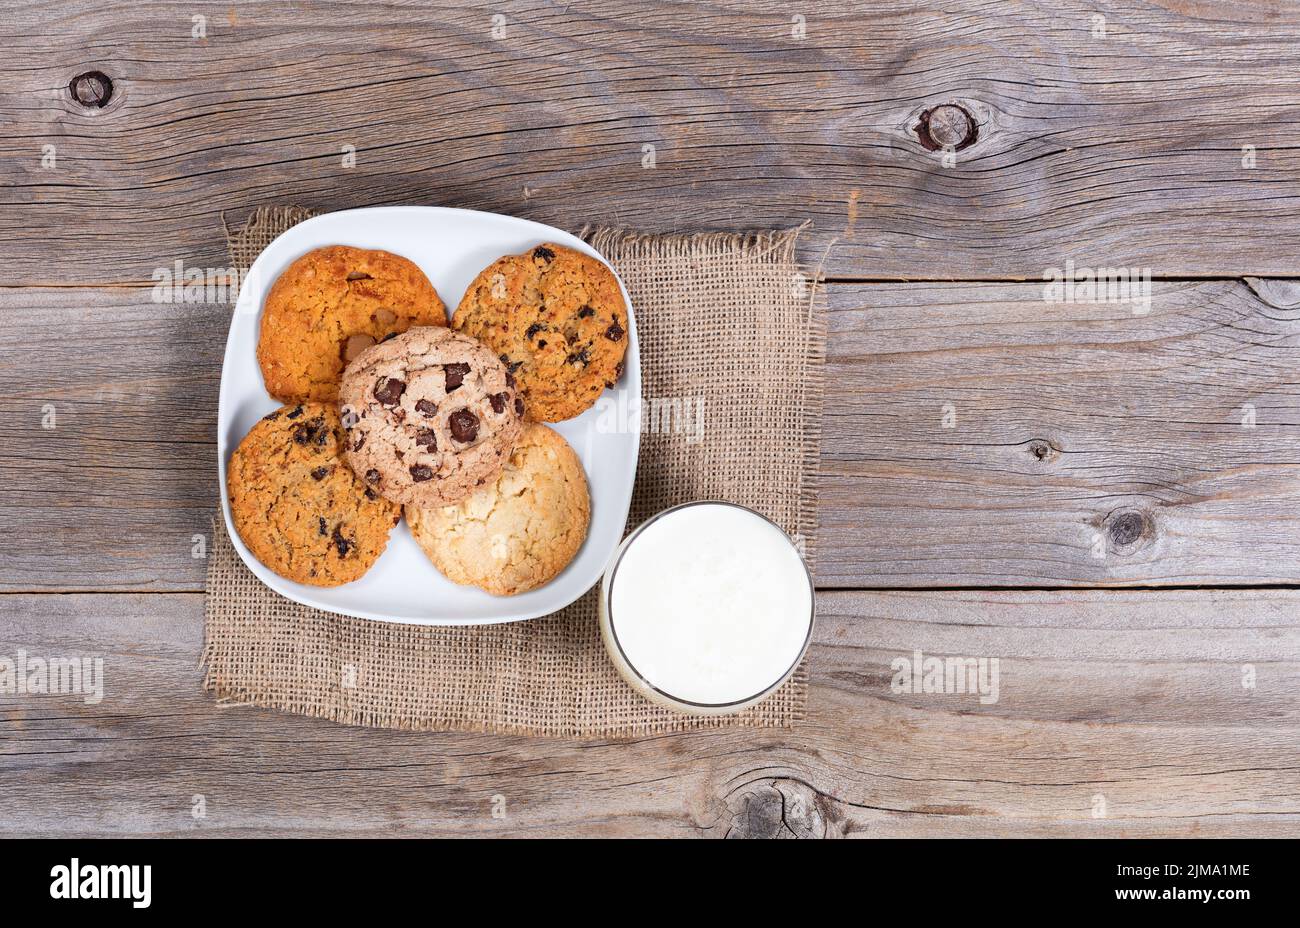 Variety of baked cookies in napkin and glass of milk on rustic wooden boards Stock Photo